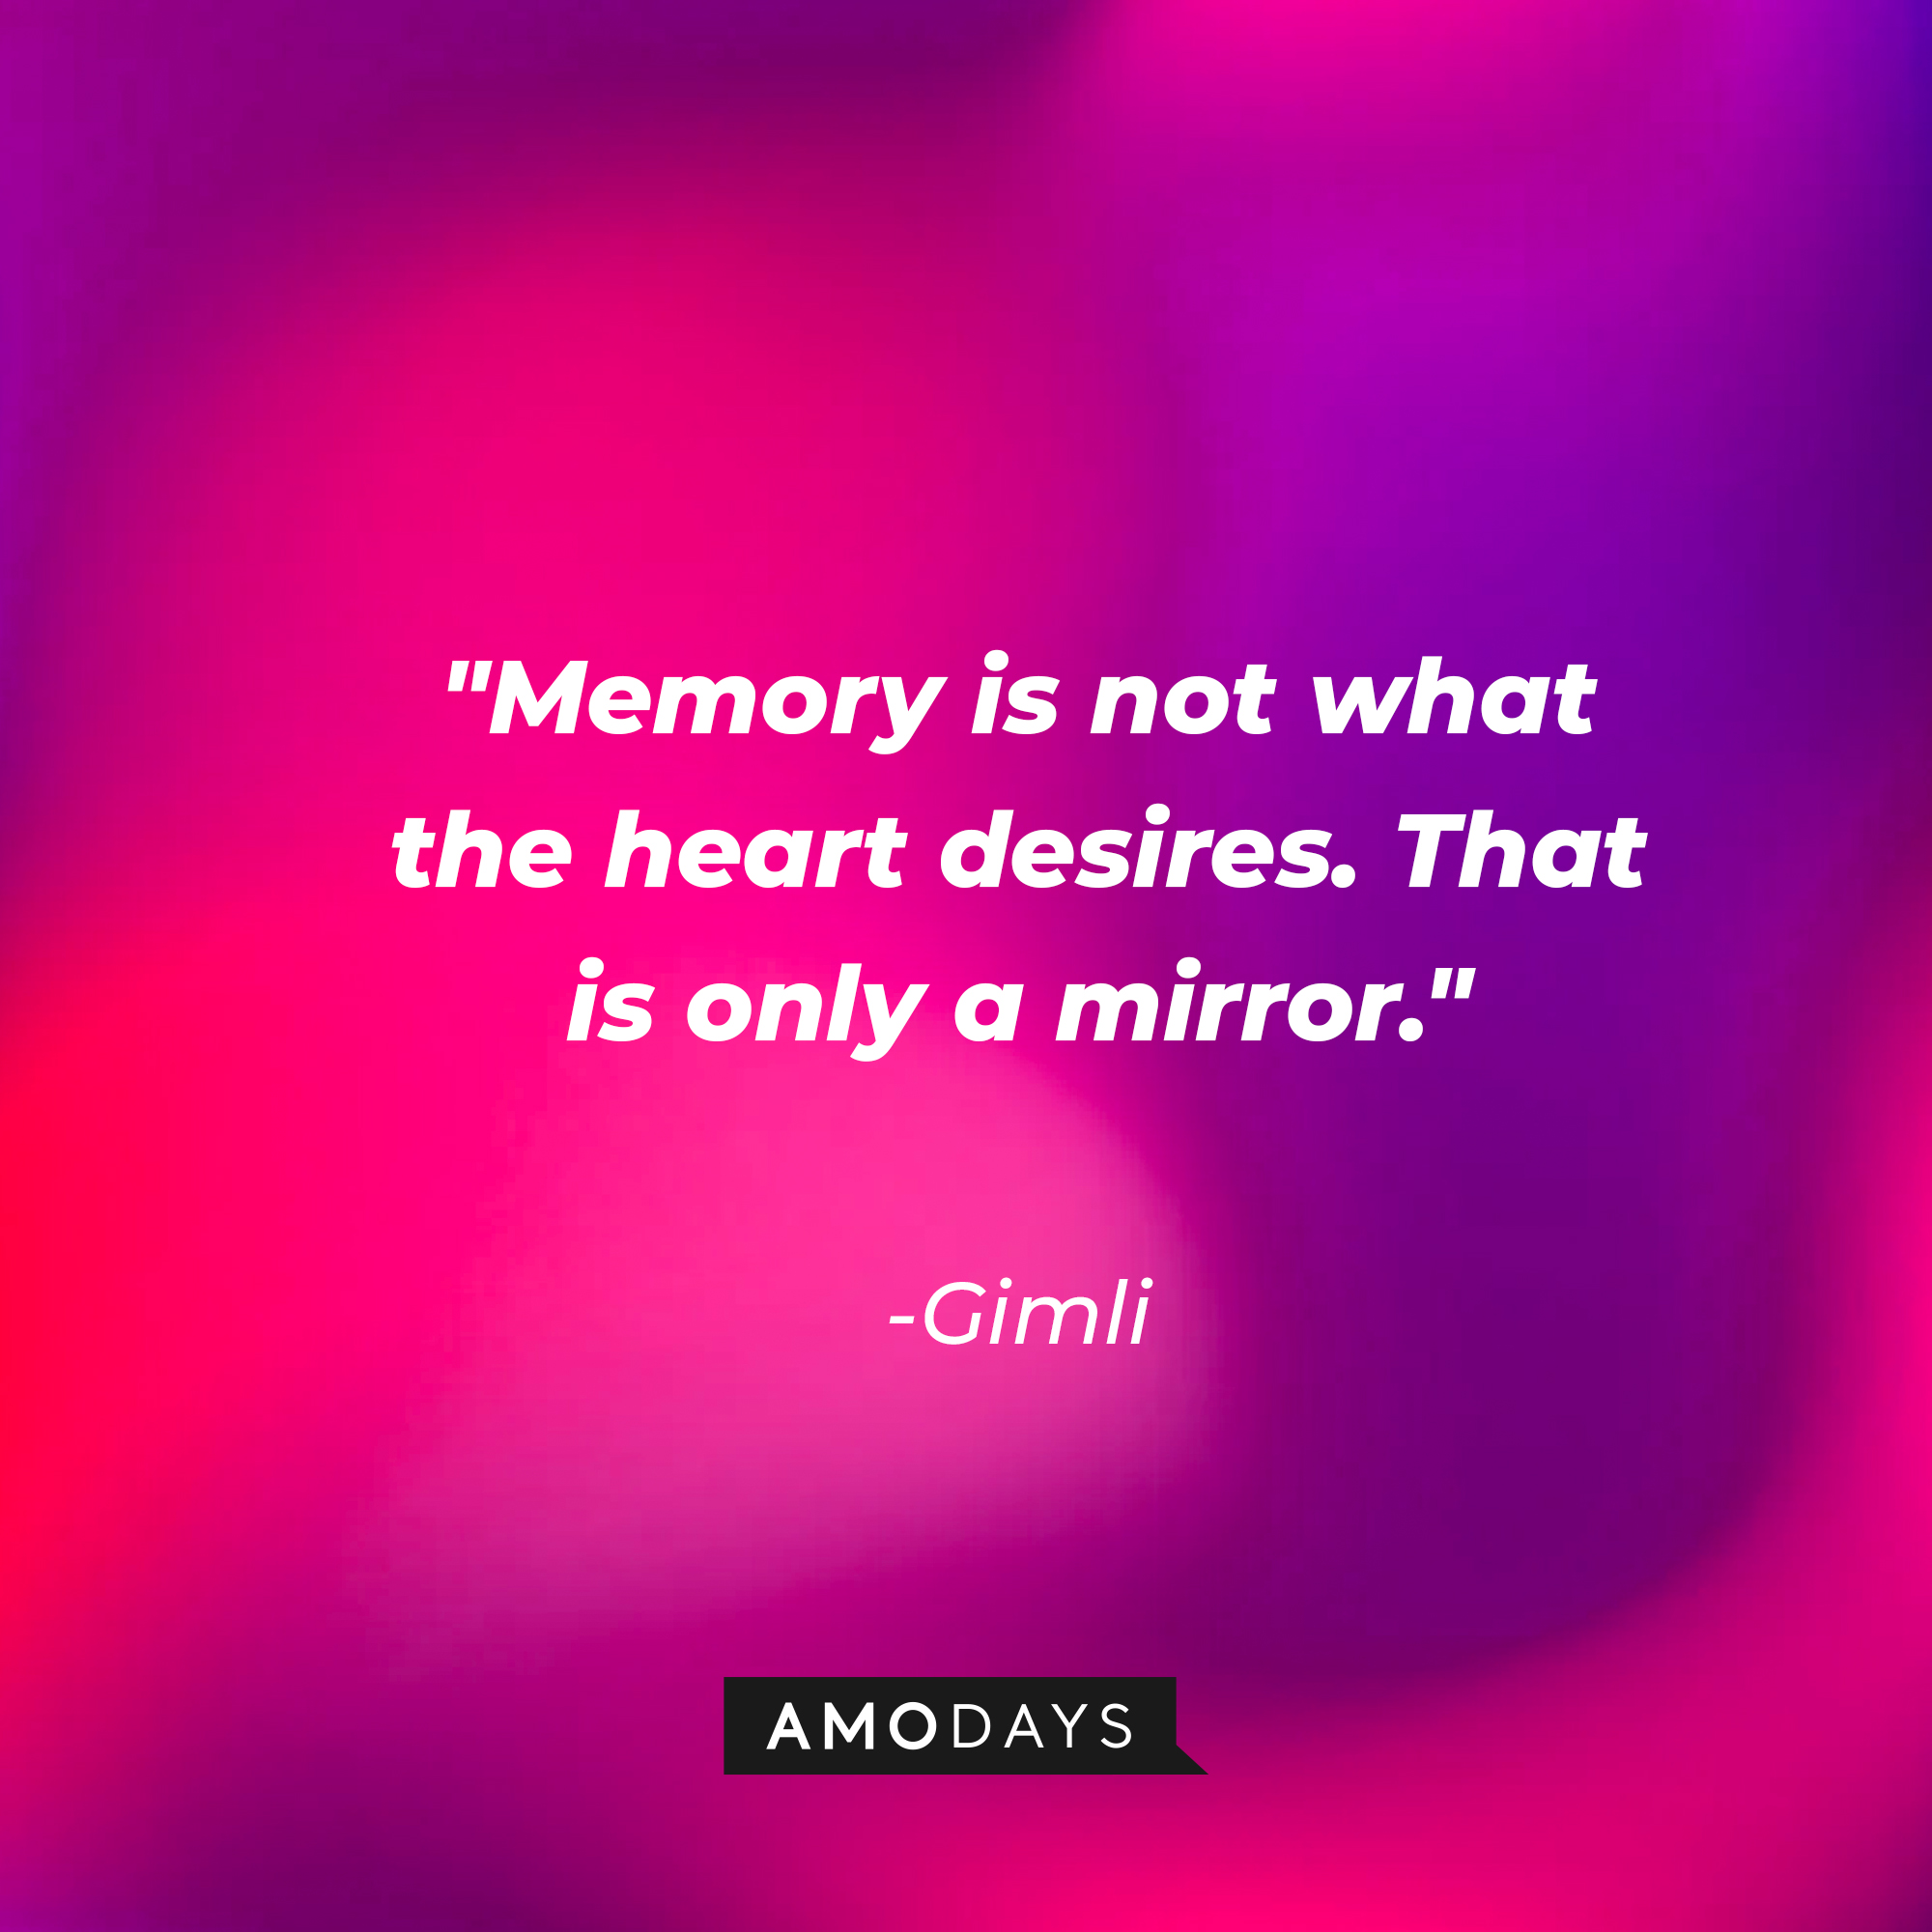 Gimli's quote: "Memory is not what the heart desires. That is only a mirror." | Source: AmoDays